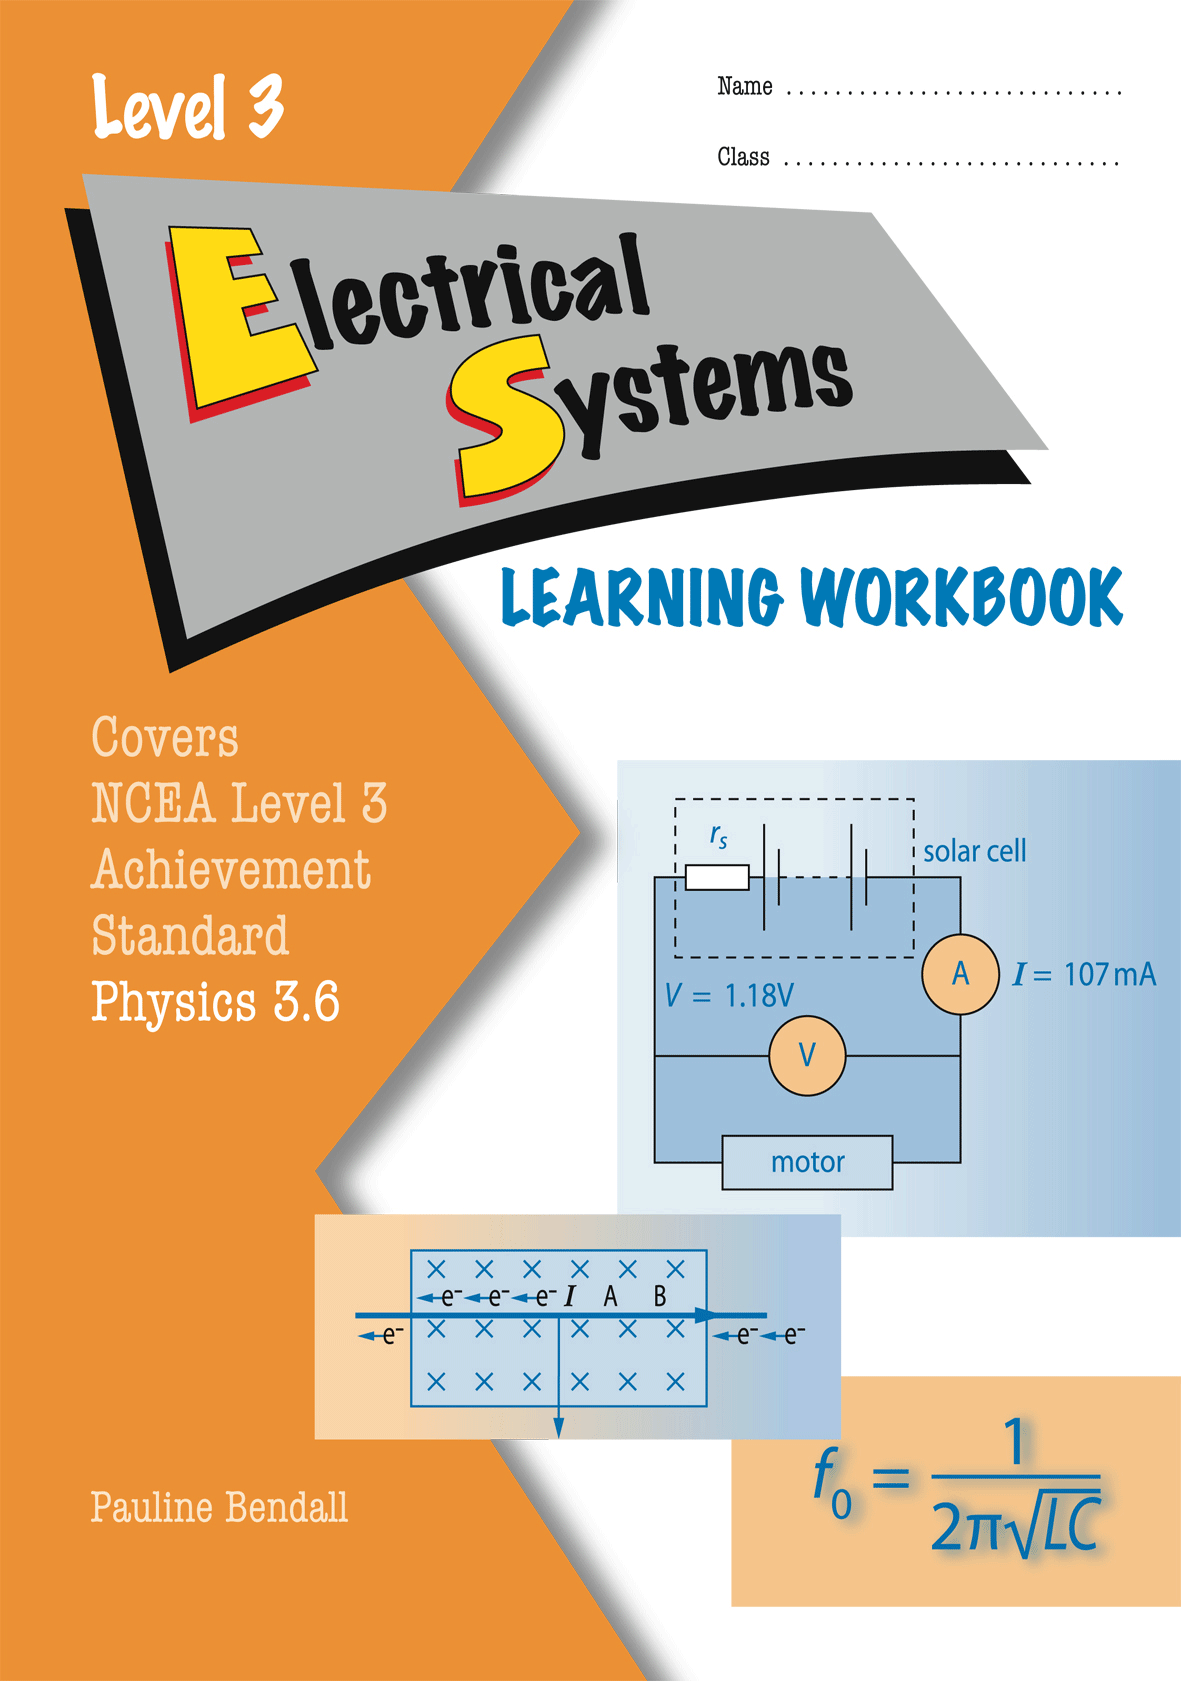 Level 3 Electrical Systems 3.6 Learning Workbook